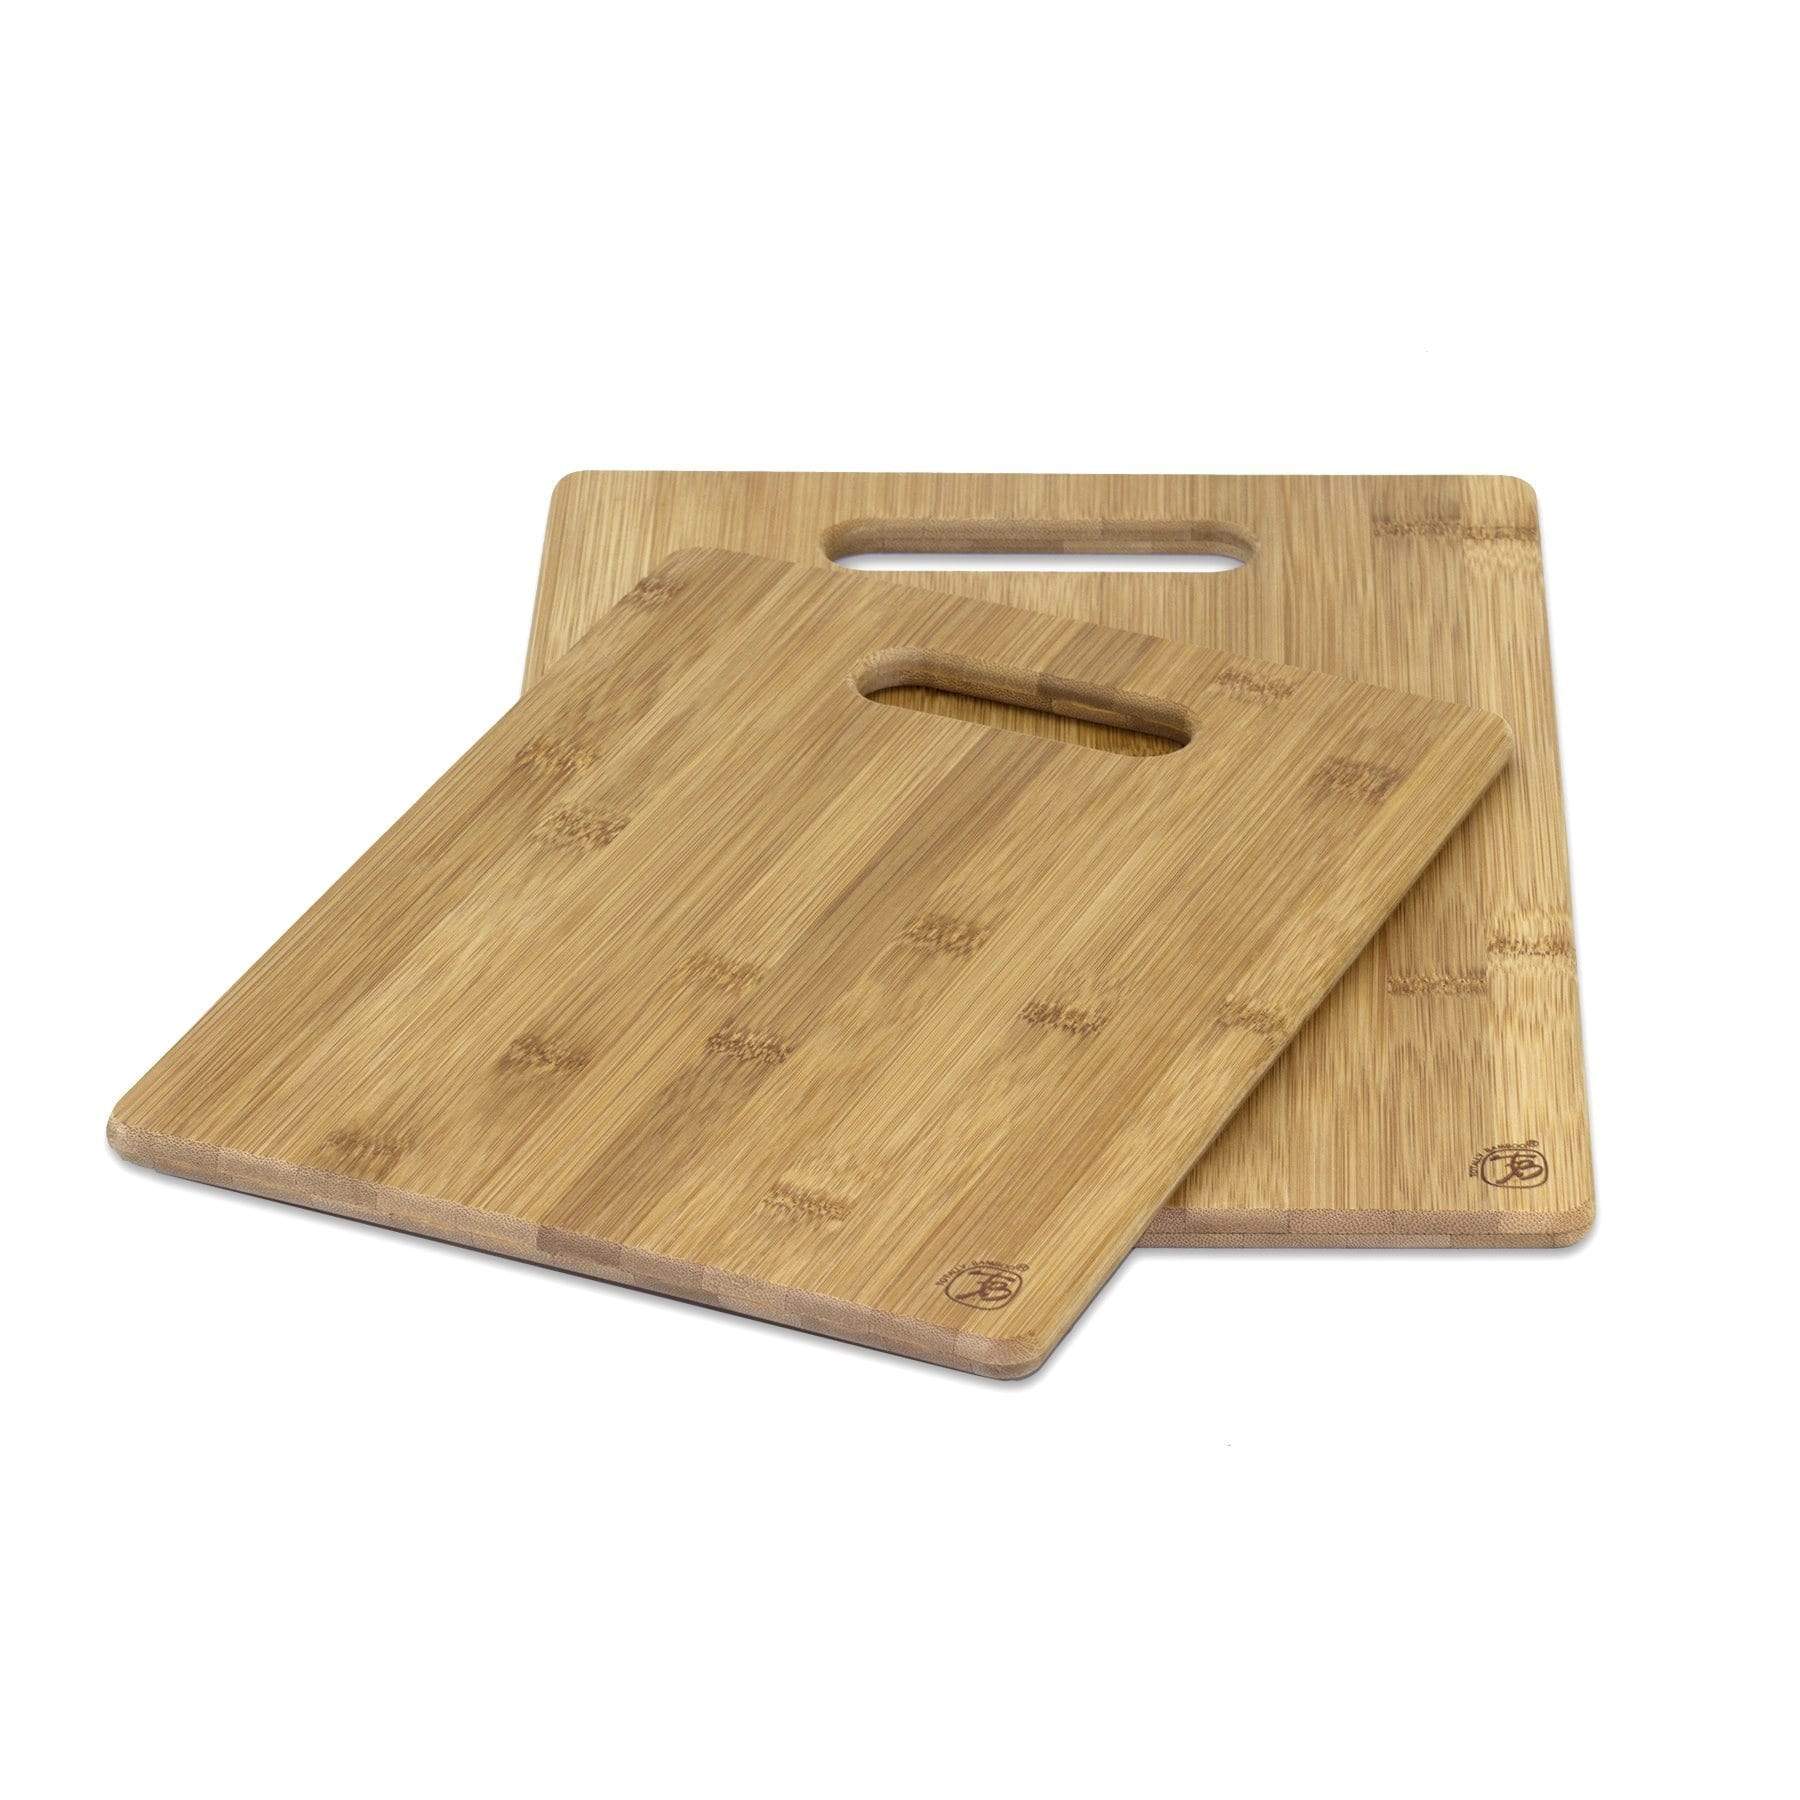 Totally Bamboo 3-Piece Bamboo Cutting Board Set Review